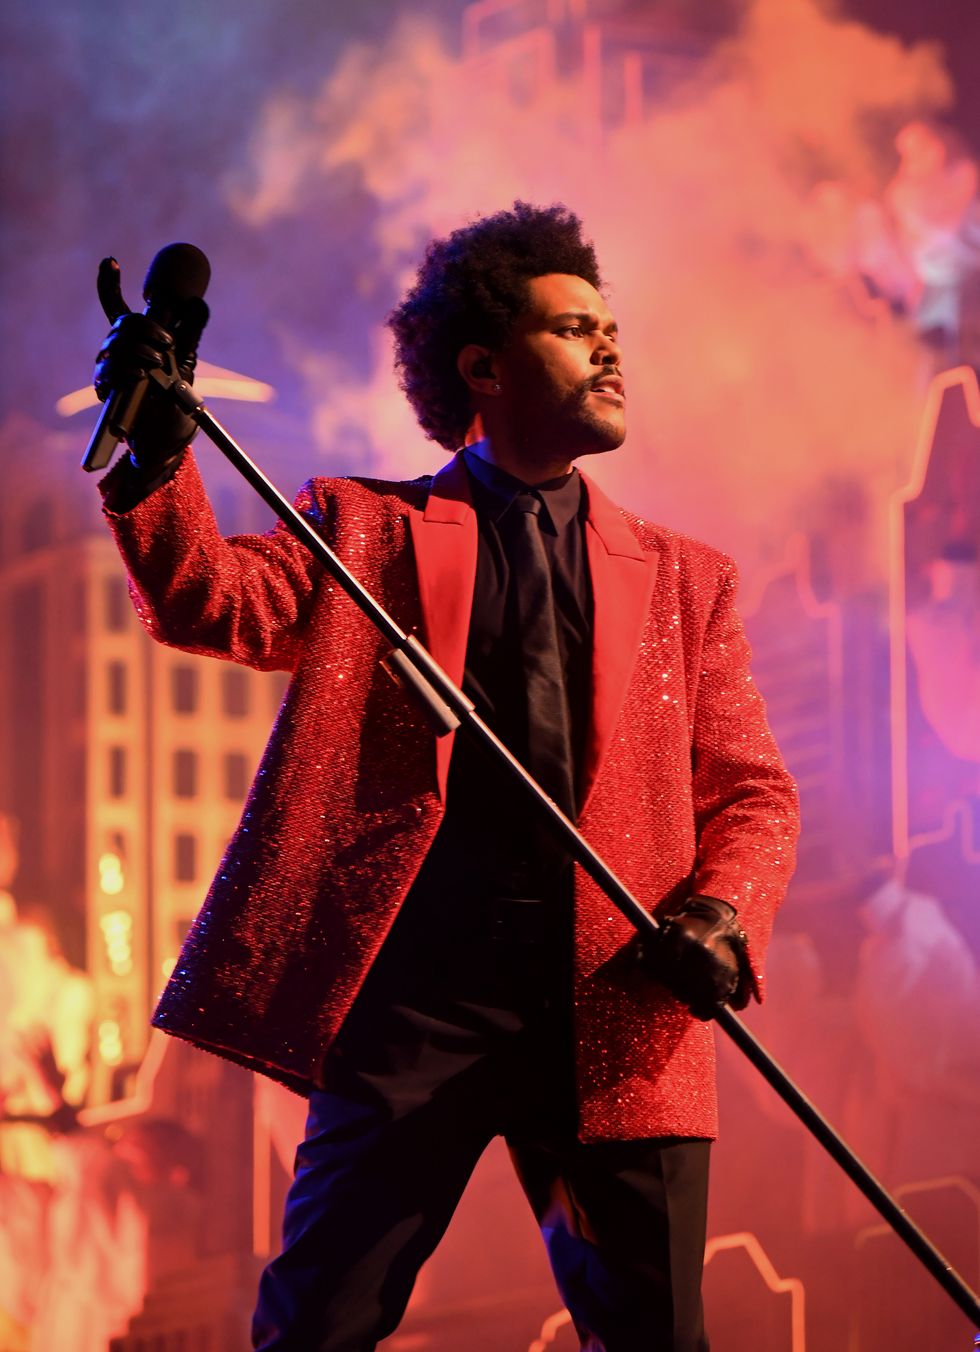 The Weeknd Album Review - 'Dawn FM' Is The Weeknd's Prince Moment